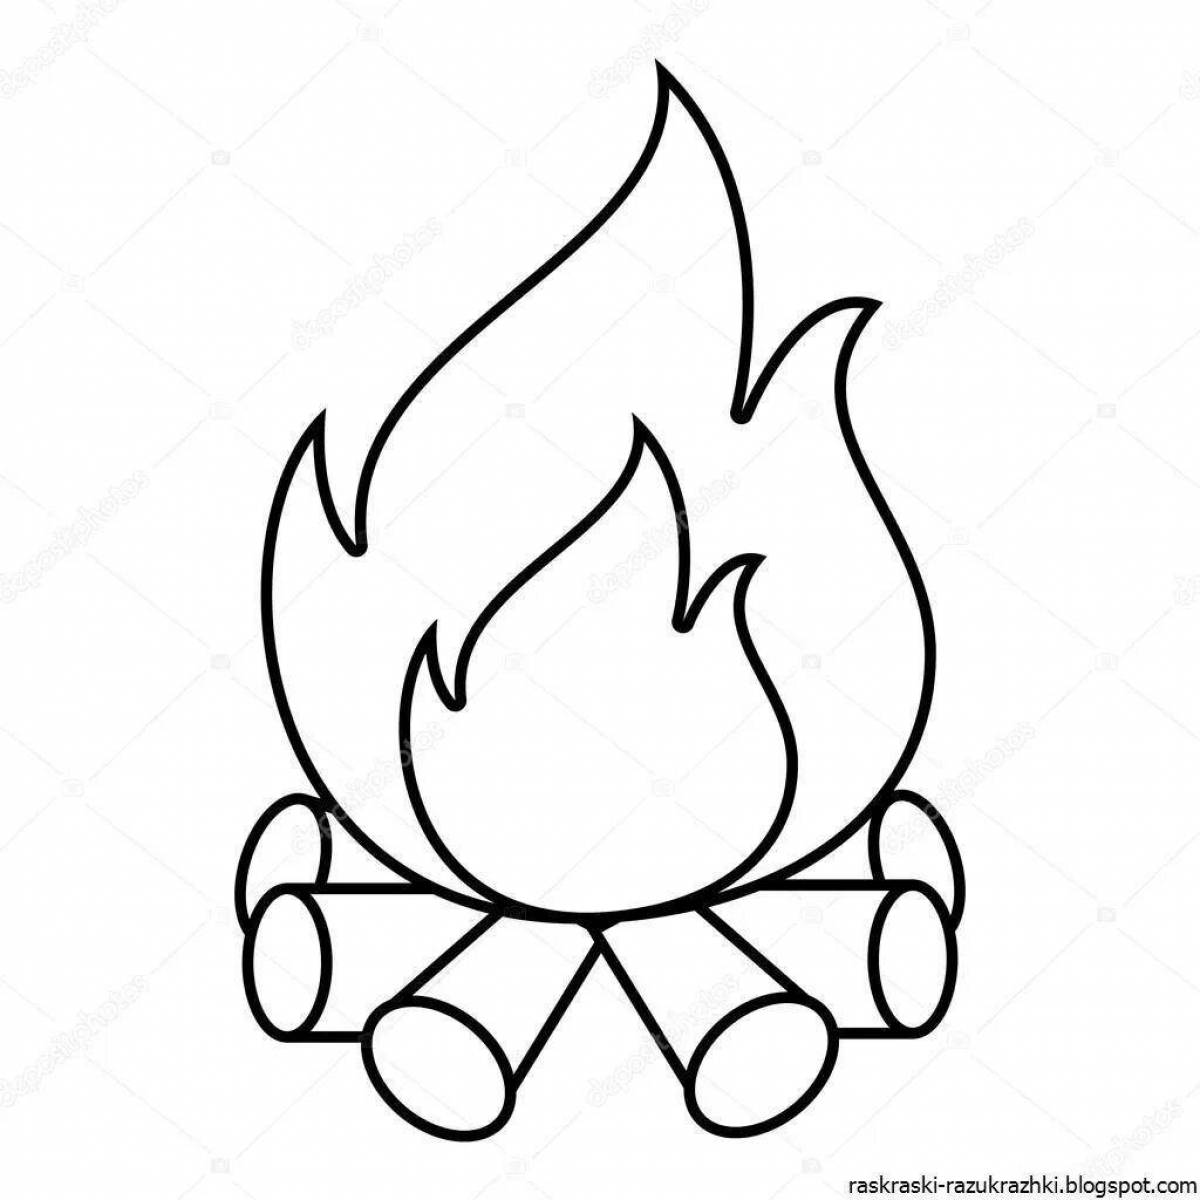 Coloring book glowing bonfire for babies